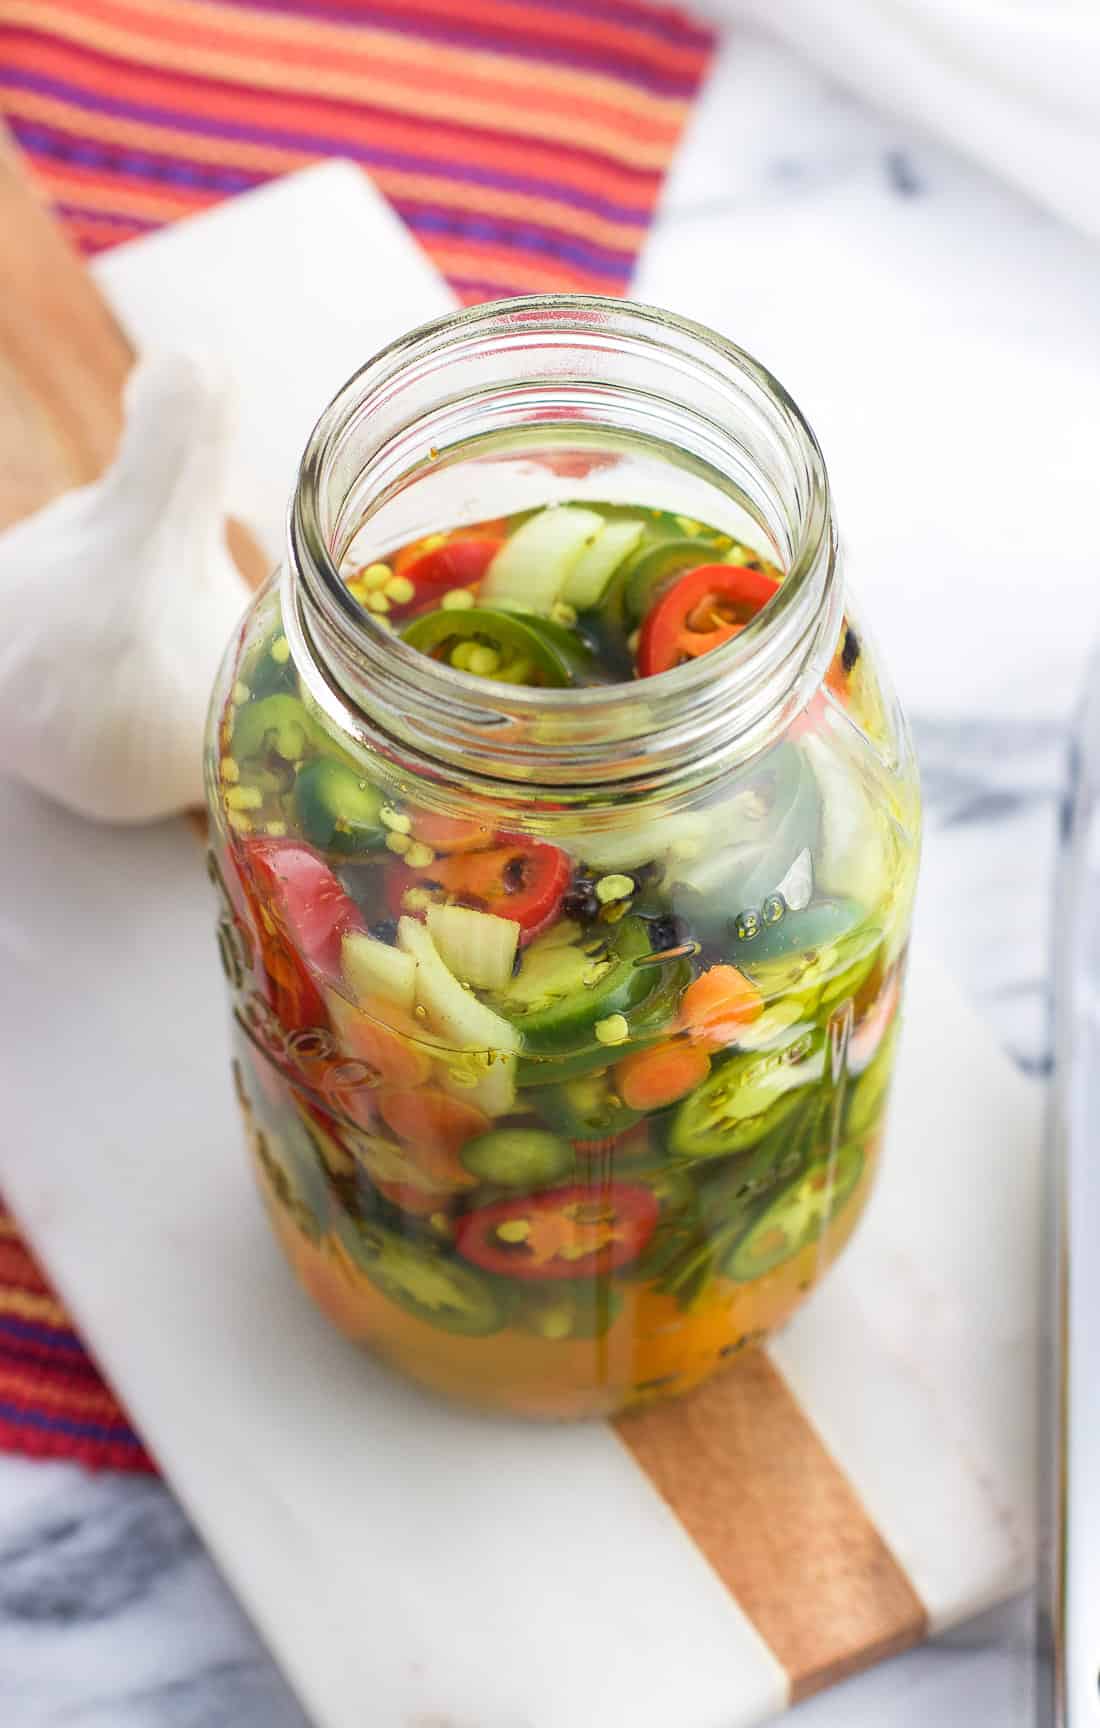 A large glass jar filled with sliced jalapeno peppers, onions, garlic, and carrots and pickling liquid next to a whole head of garlic.